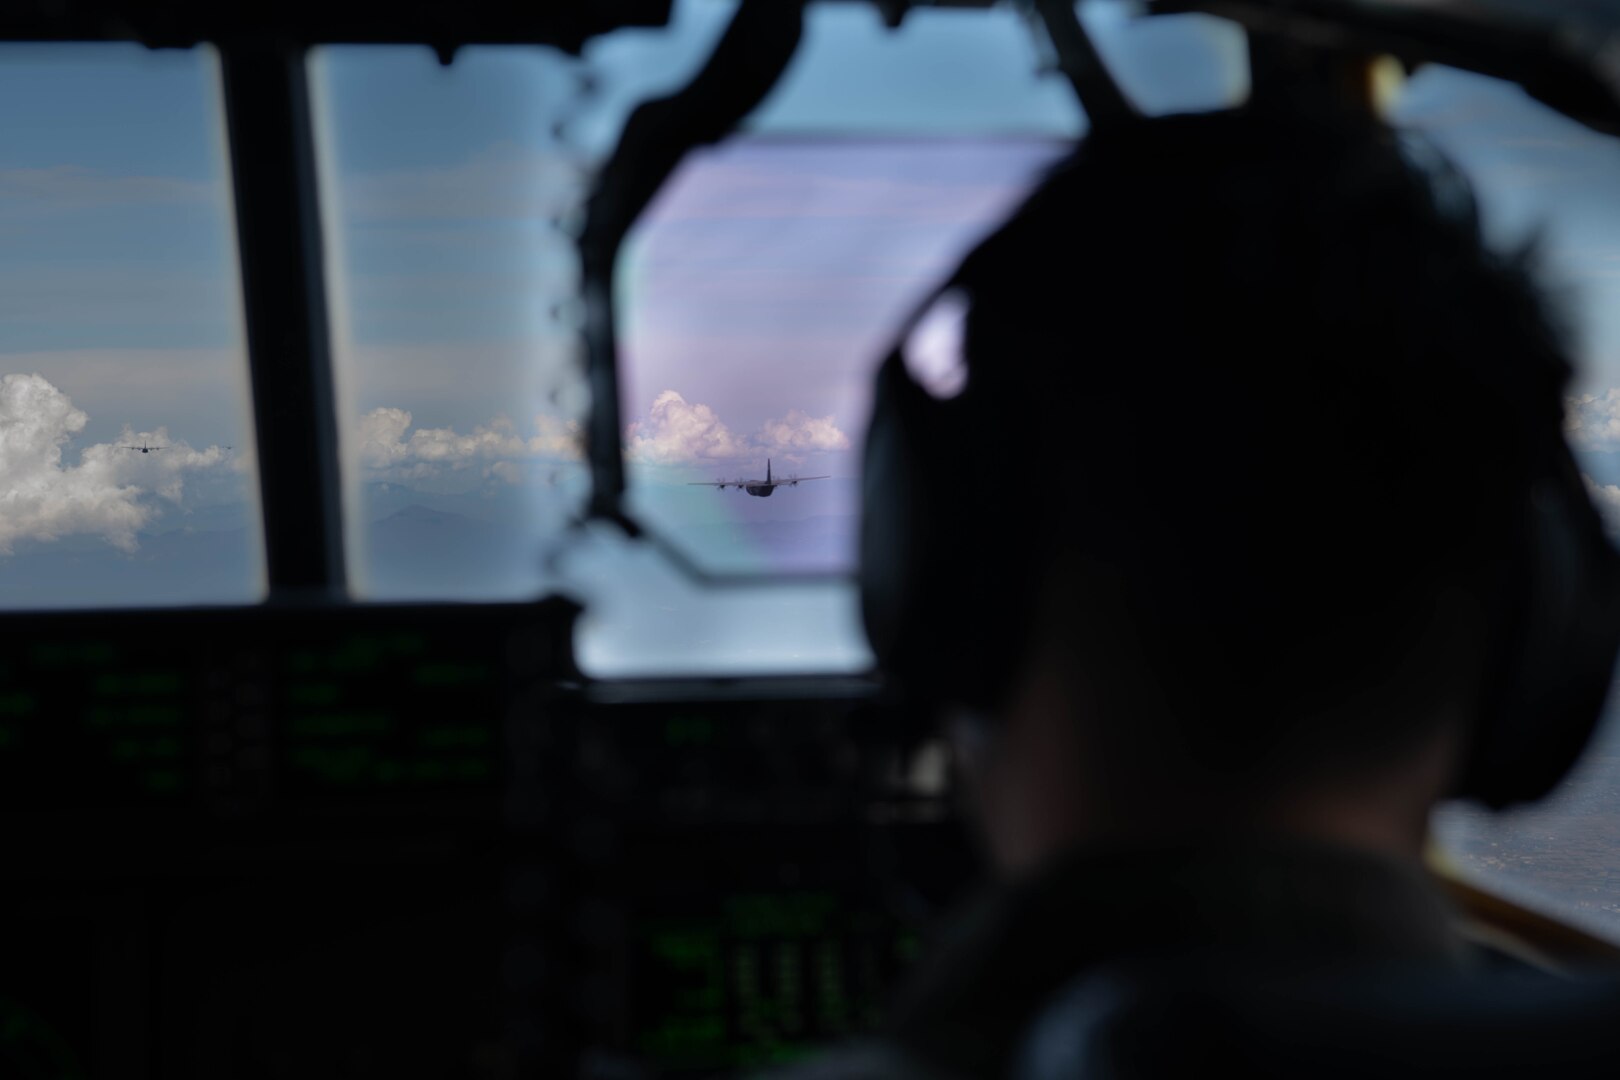 C-130J Super Hercules assigned to the 36th Airlift Squadron fly over the Japanese coastline after completing airdrops during Exercise Beverly Morning at Yokota Air Base, Japan, Oct. 25, 2023. The 36th AS maintains C-130J mission-ready aircrew to conduct theater airlift, special operations, aeromedical evacuation, search and rescue, repatriation and humanitarian relief missions. (U.S. Air Force Photo by Senior Airman Brooklyn Golightly)